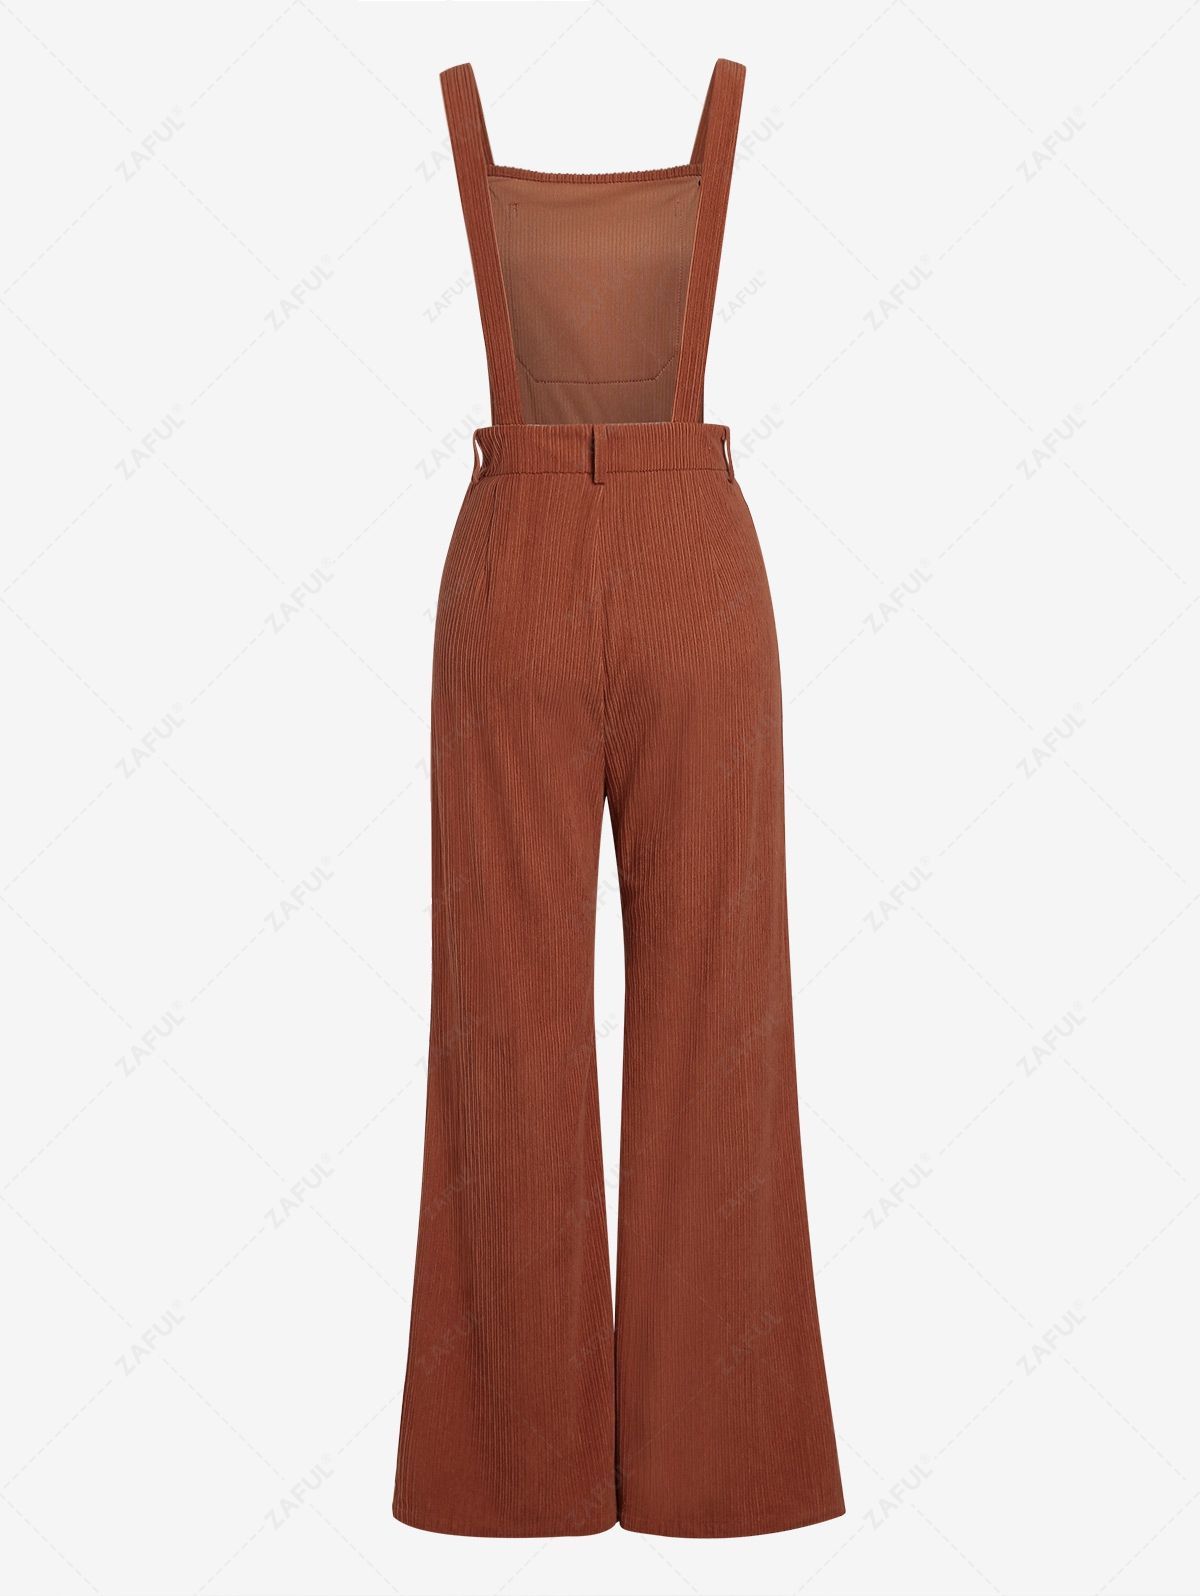 Jumpsuits & Rompers ZAFUL Women's Solid Color Casual Daily Pockets Corduroy Pleated Waist Pinafore Overalls Wide Leg Jumpsuit